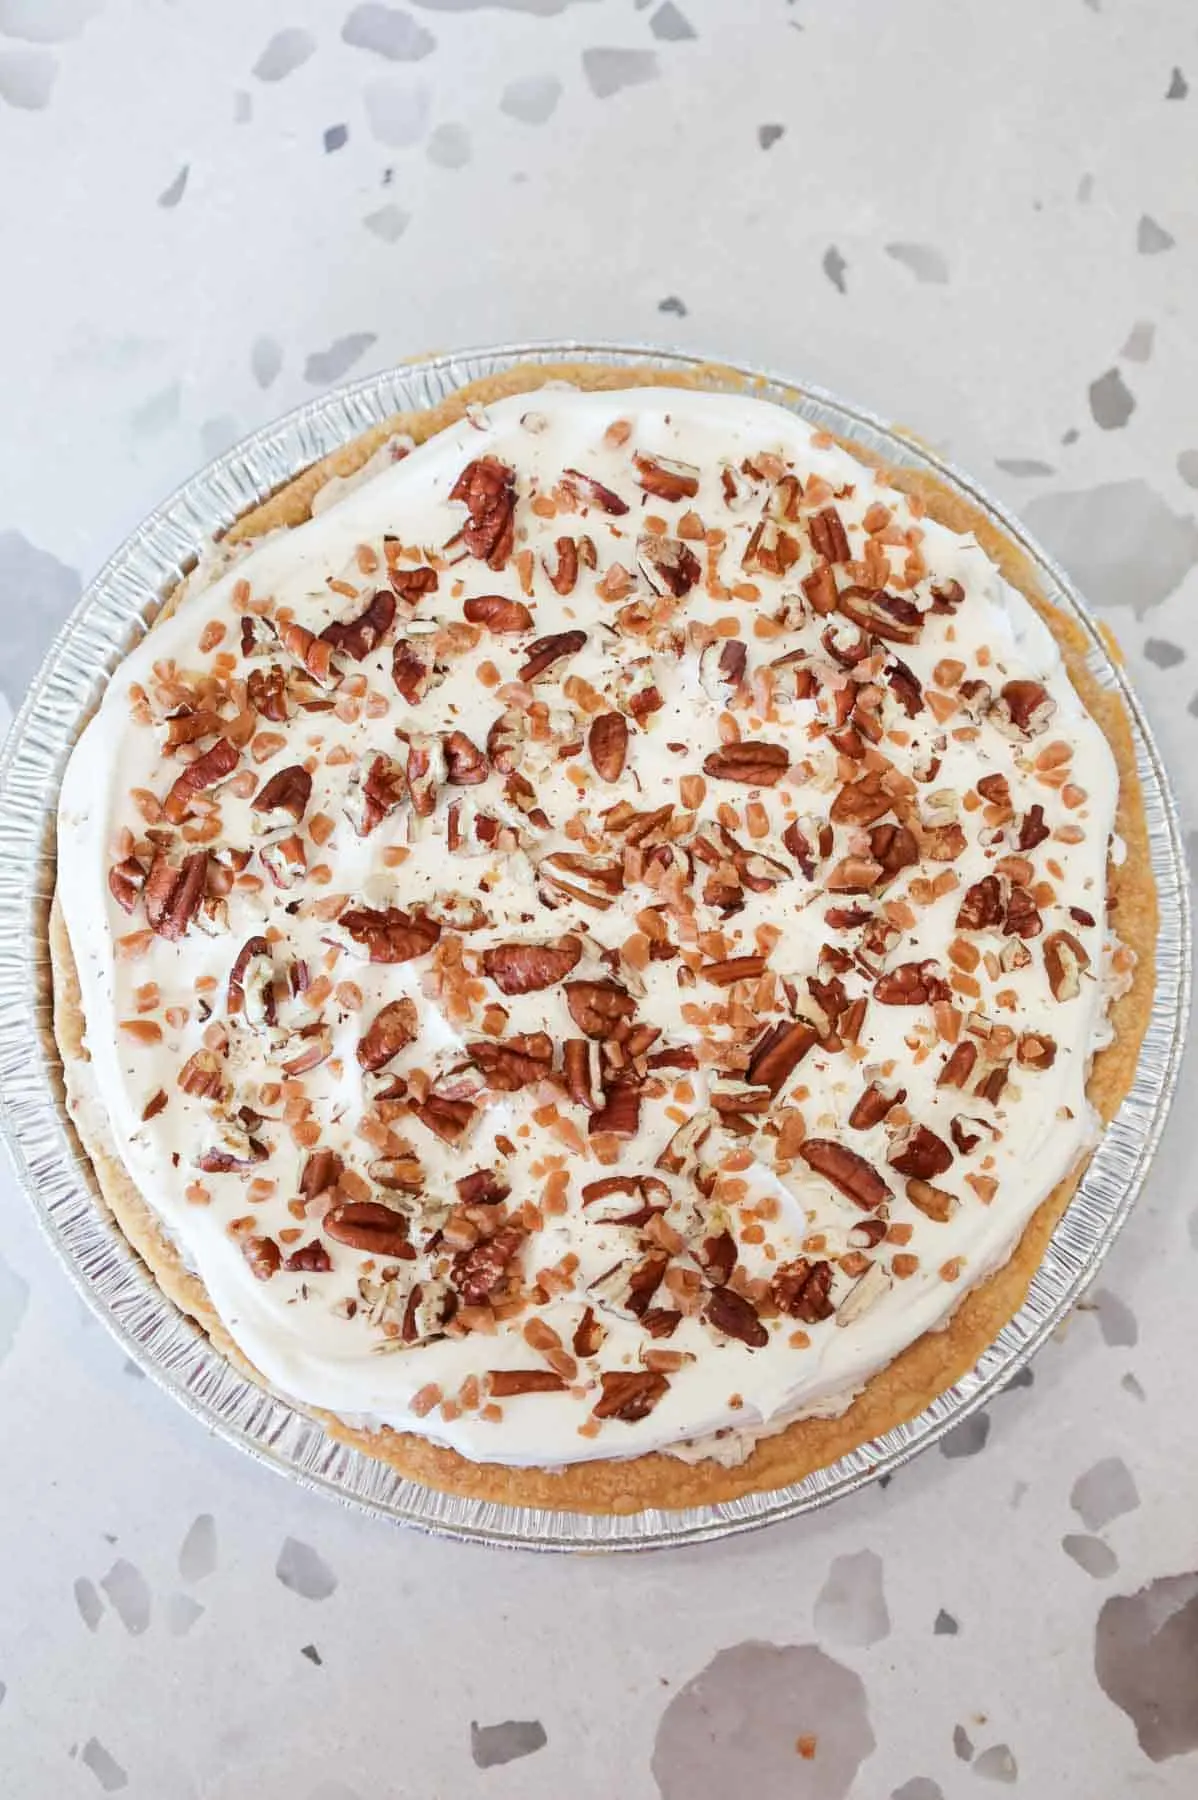 toffee bits and pecan pieces on top of cream pie